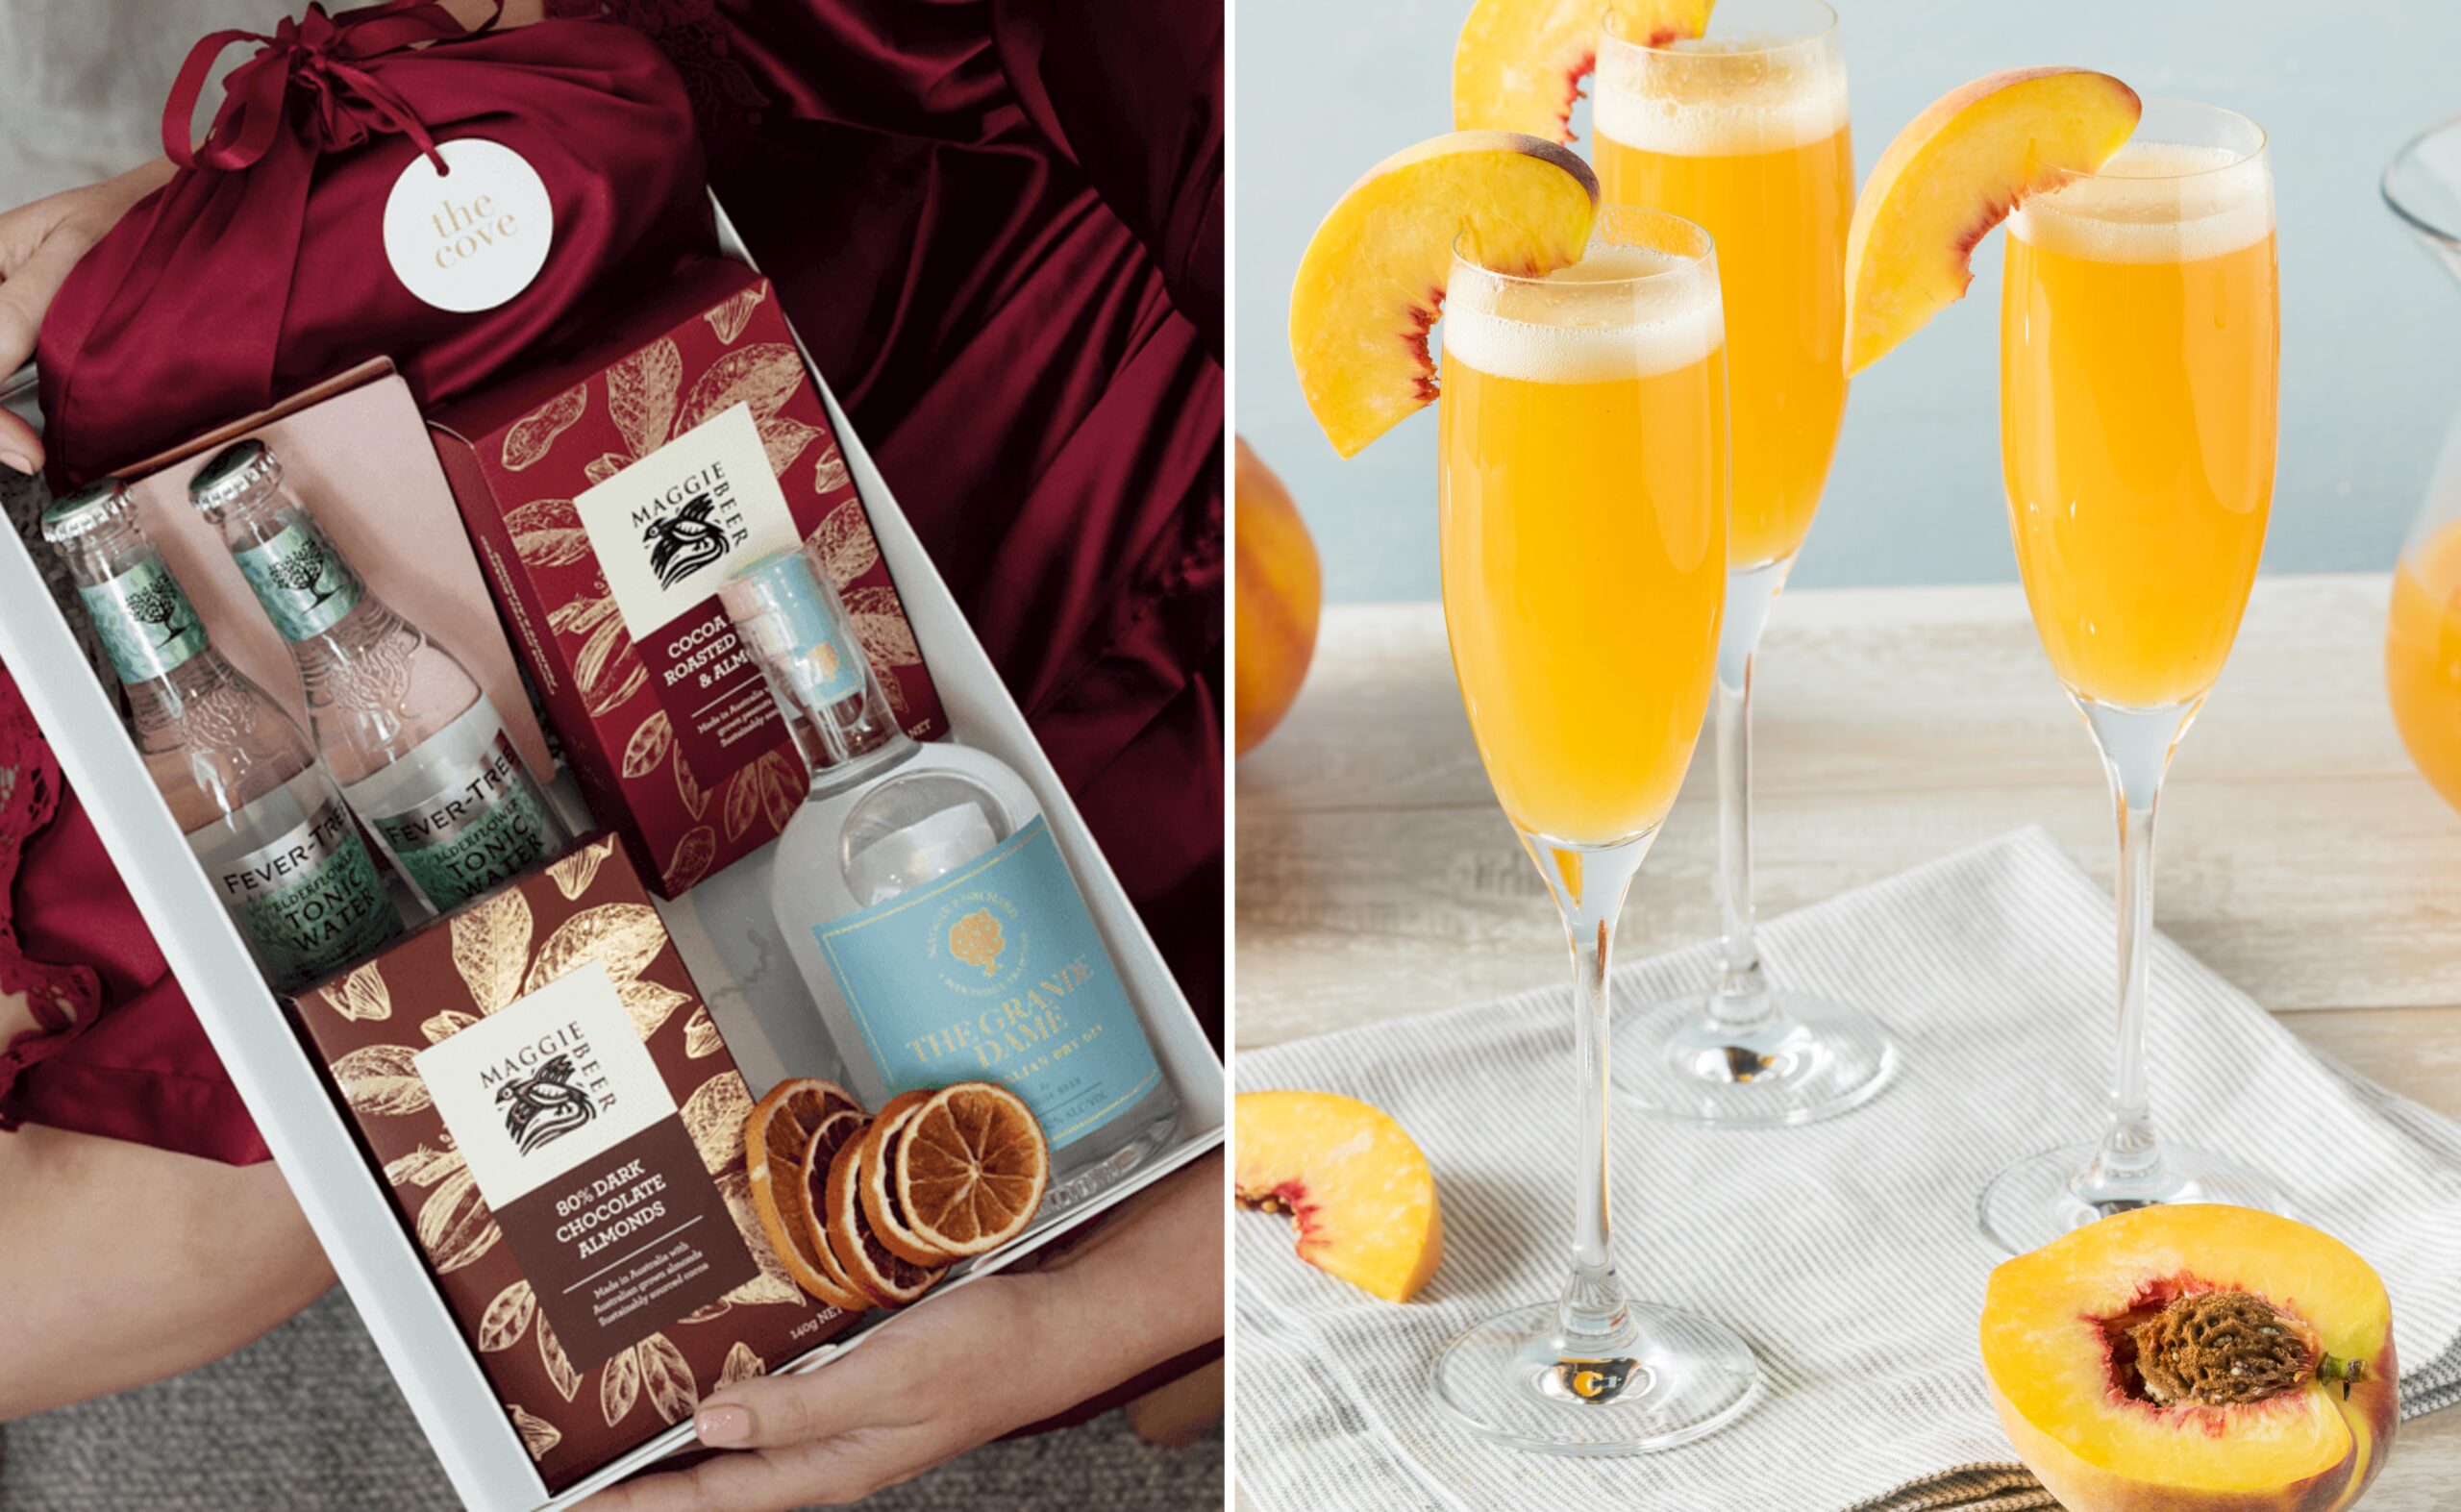 Top 12 DIY cocktail kits and recipes: At-home happy hour has never been easier with these